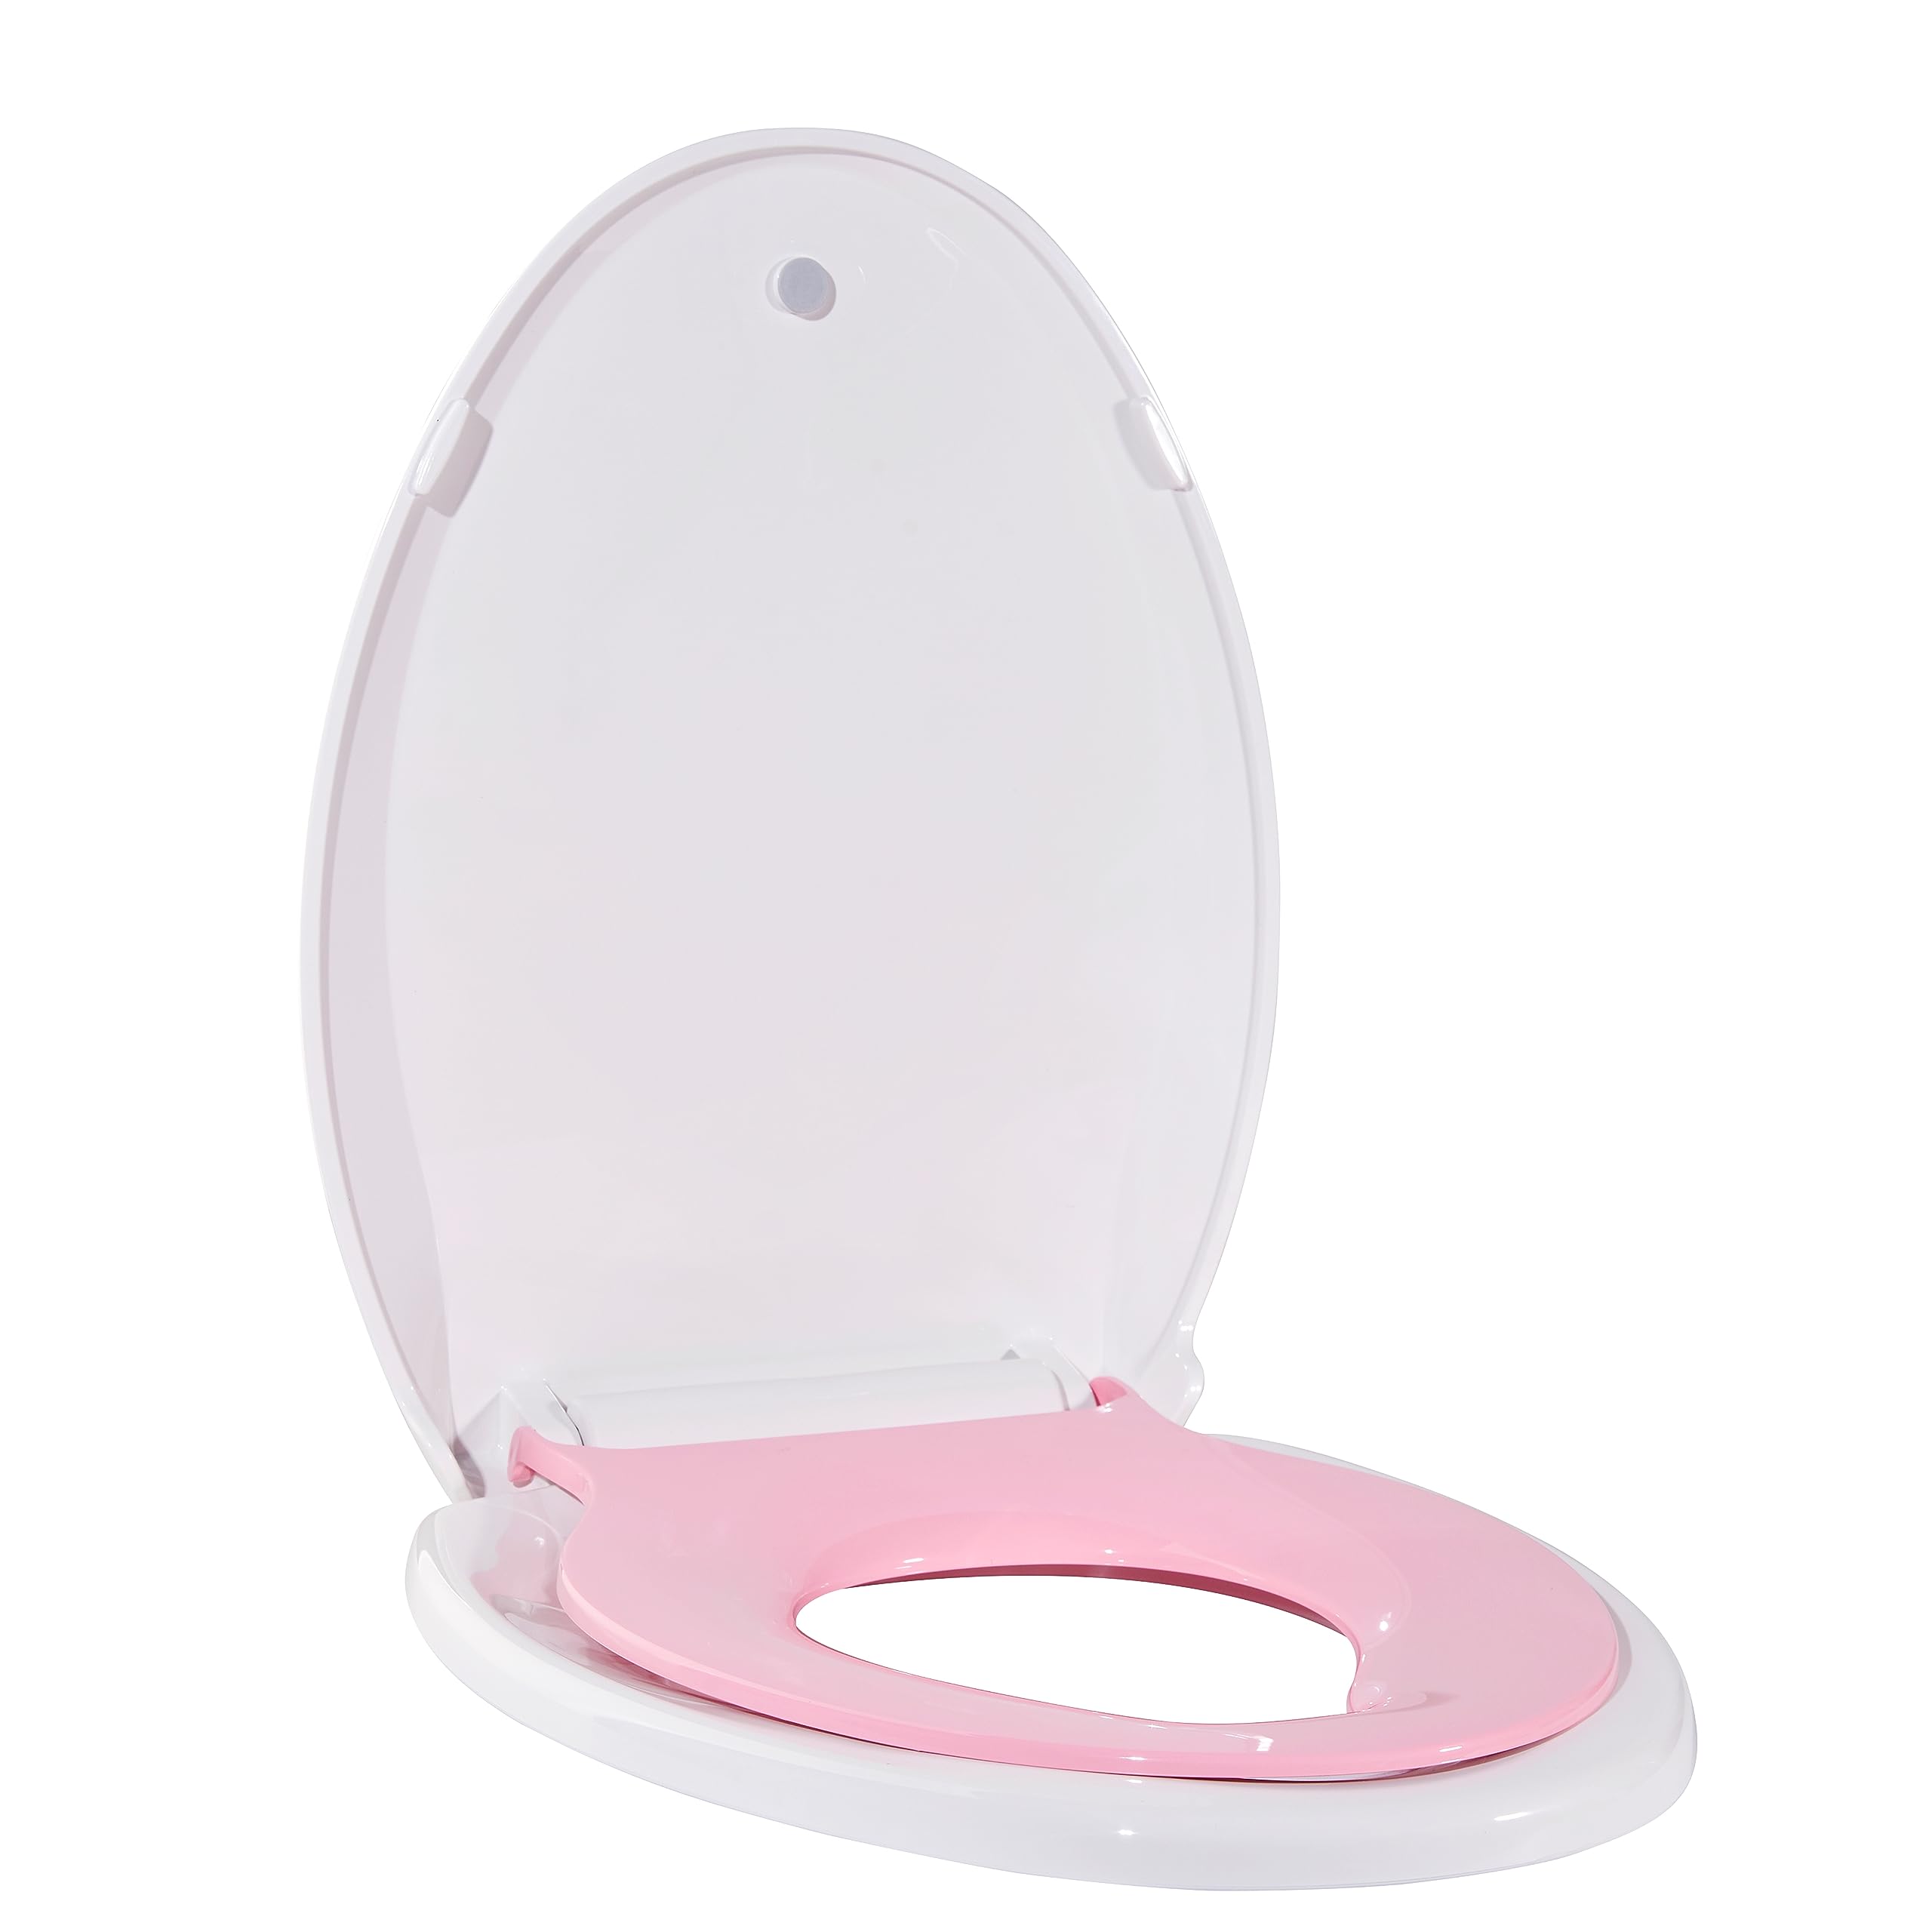 GAOMON Toilet Seat, Elongated Toilet Seat with Toddler Seat Built in, Potty Training Toilet Seat Elongated Fits Both Adult and Child, with Slow Close and Magnets- Elongated(Pink and White)